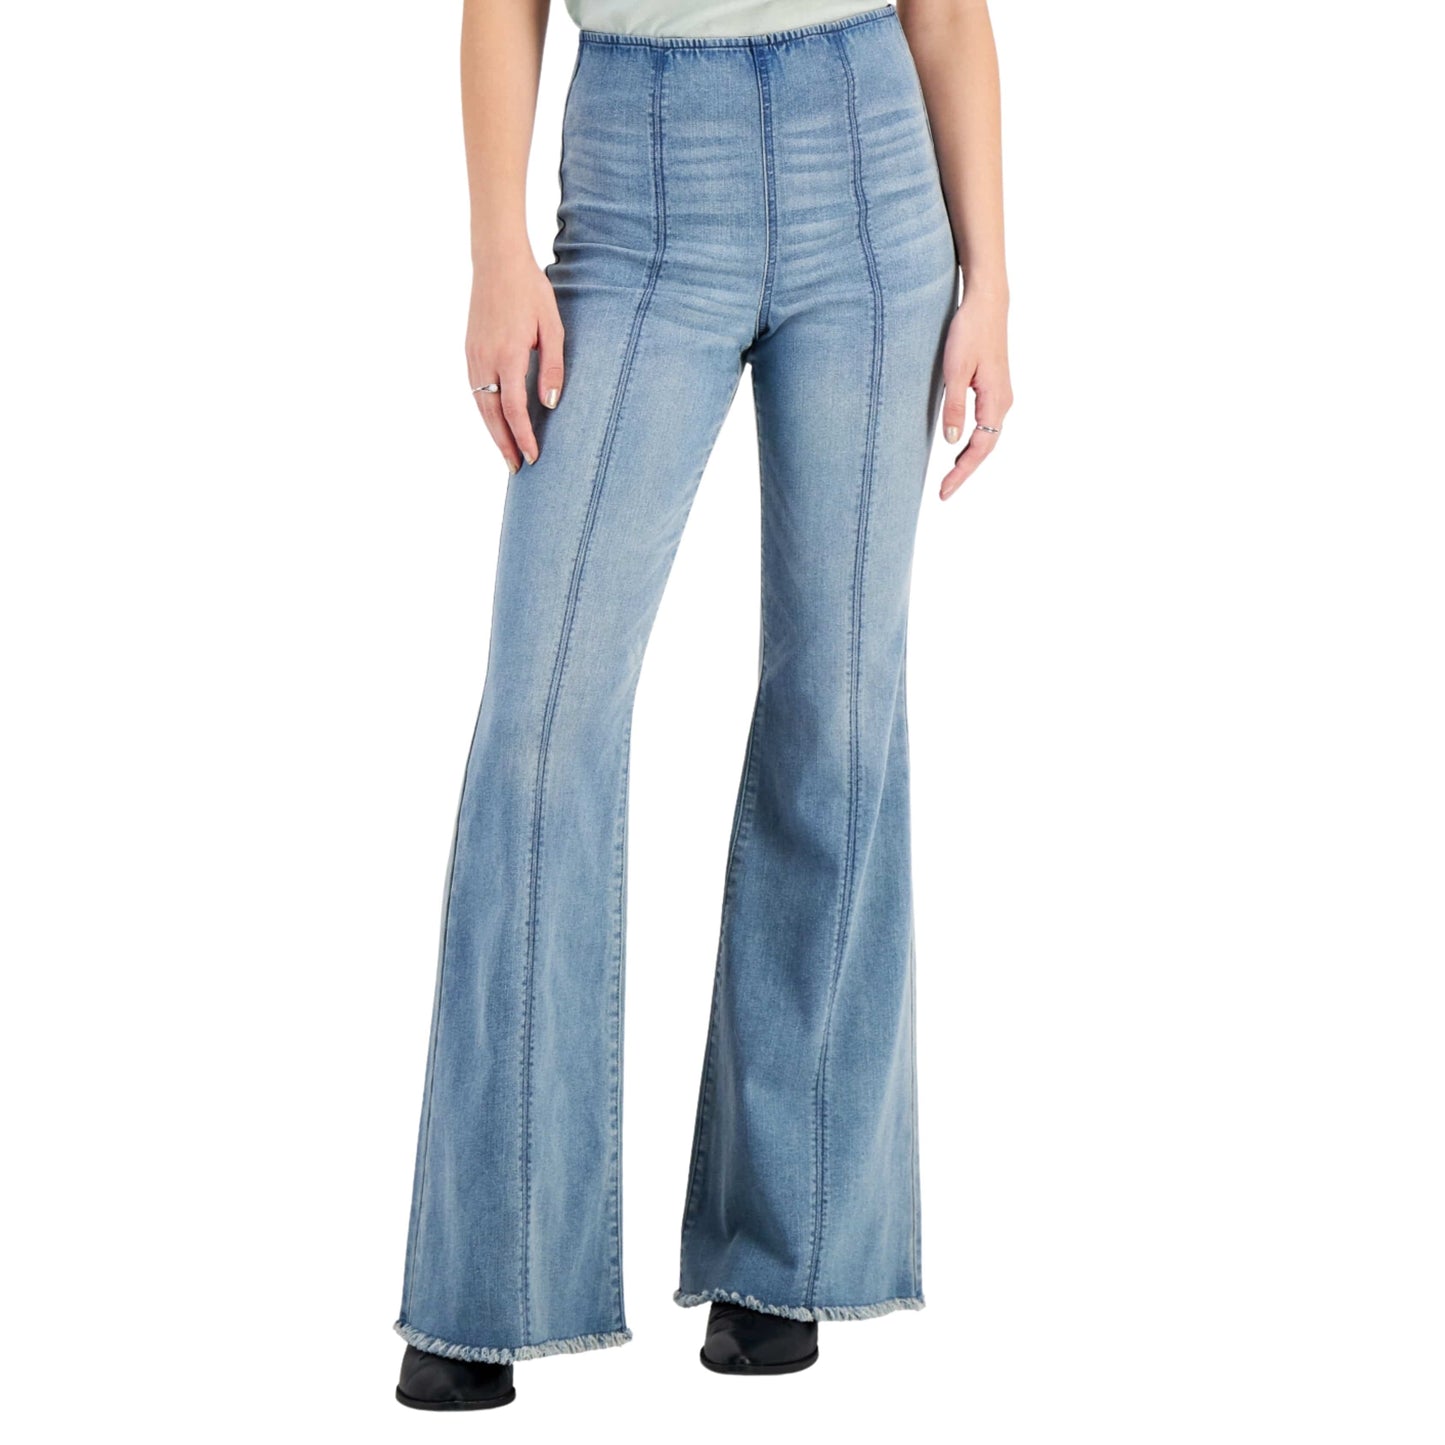 TINSELTOWN Womens Bottoms L / Blue TINSELTOWN - Seamed High Rise Pull on Flare Jeans